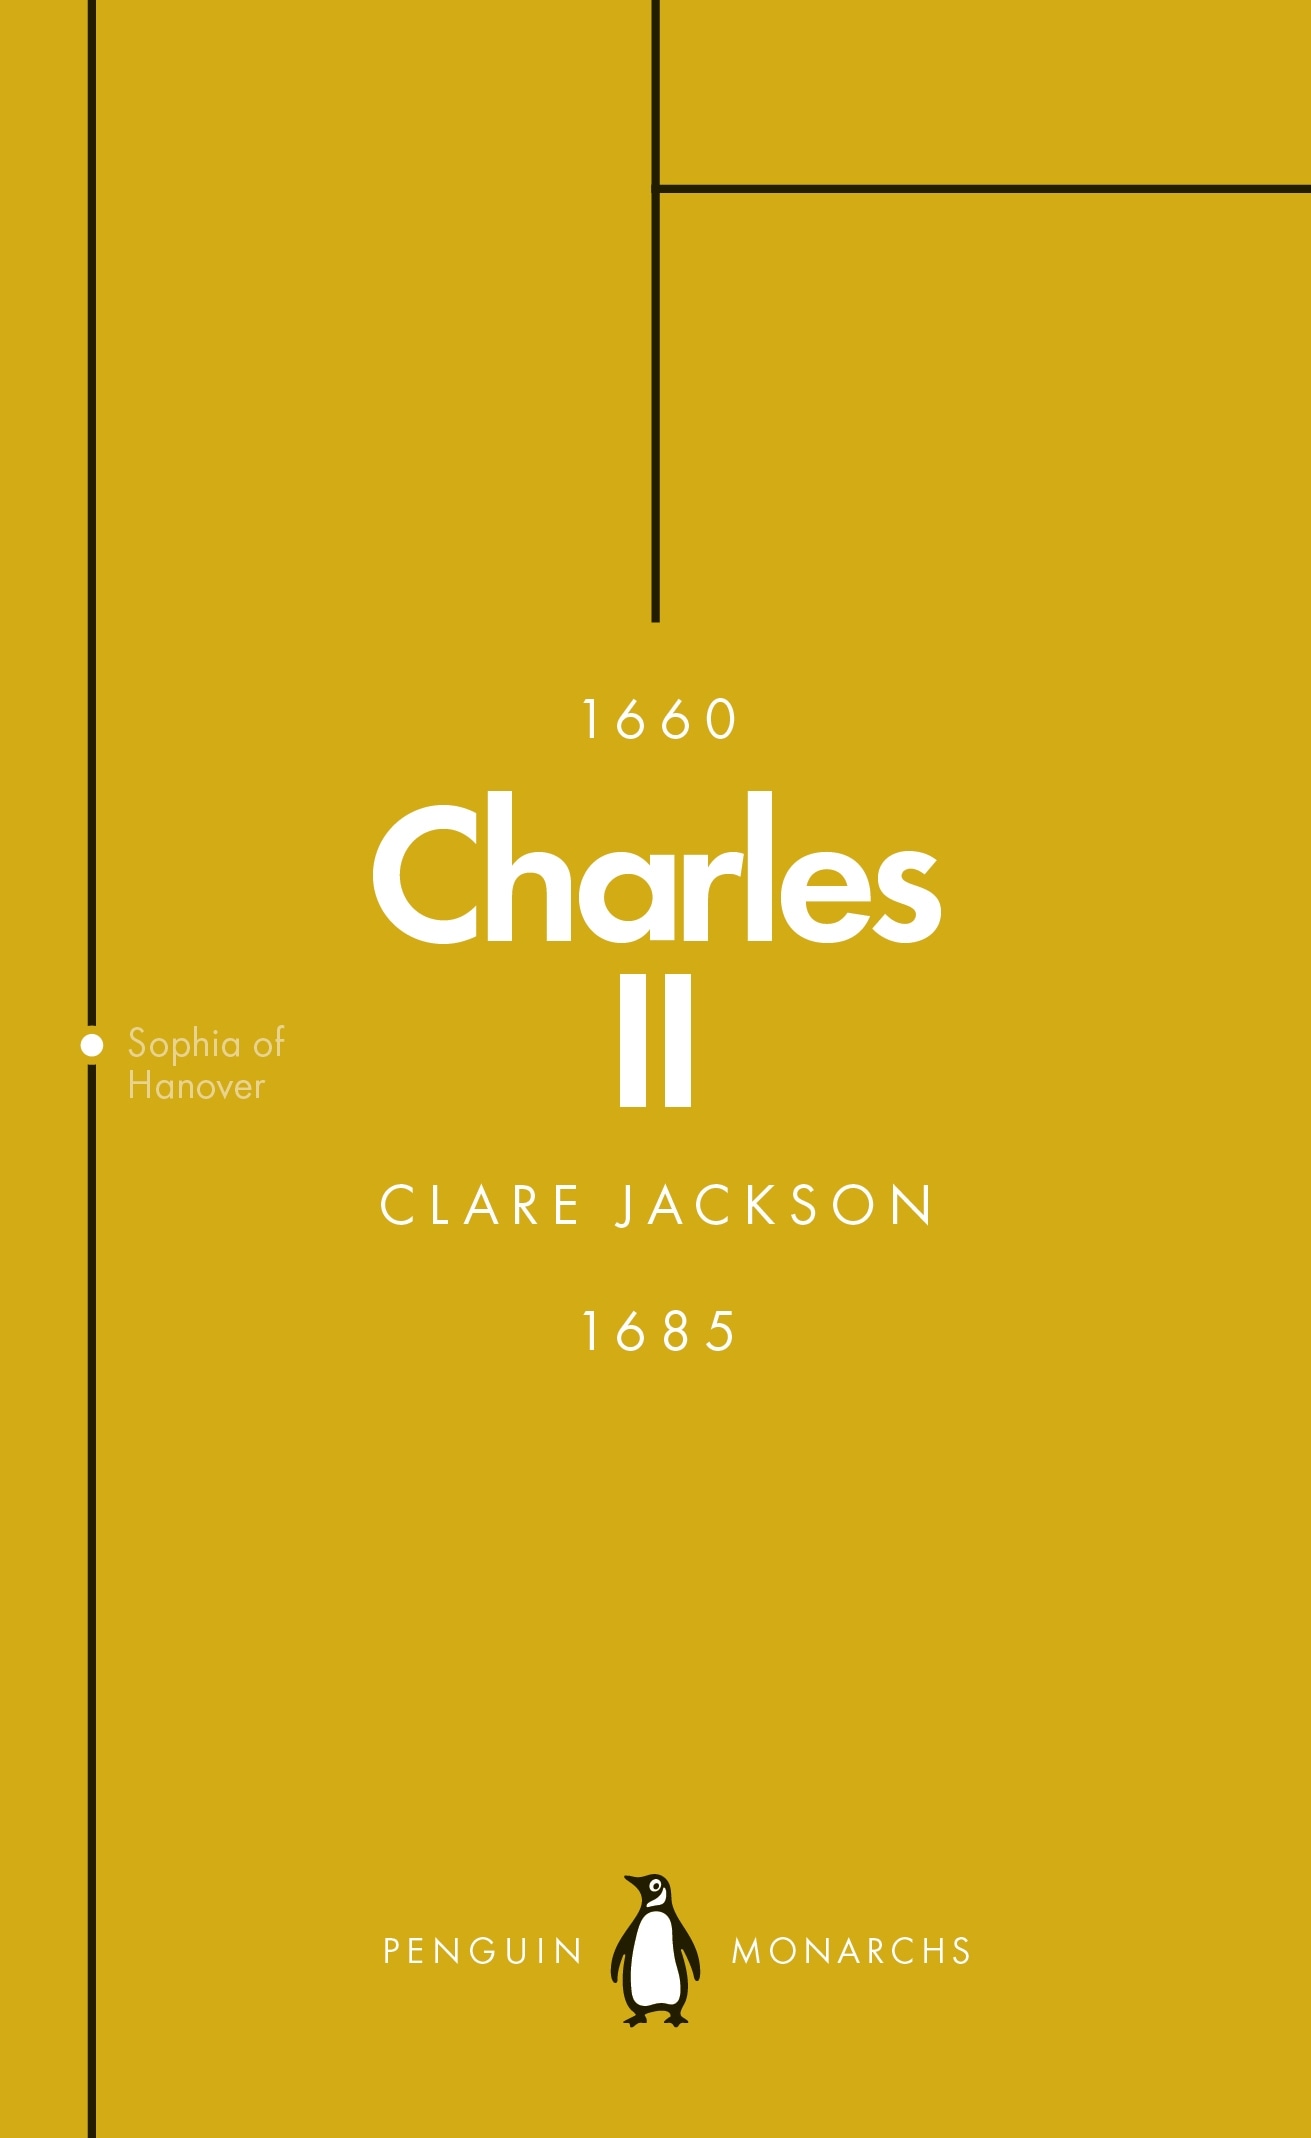 Book “Charles II (Penguin Monarchs)” by Clare Jackson — June 28, 2018